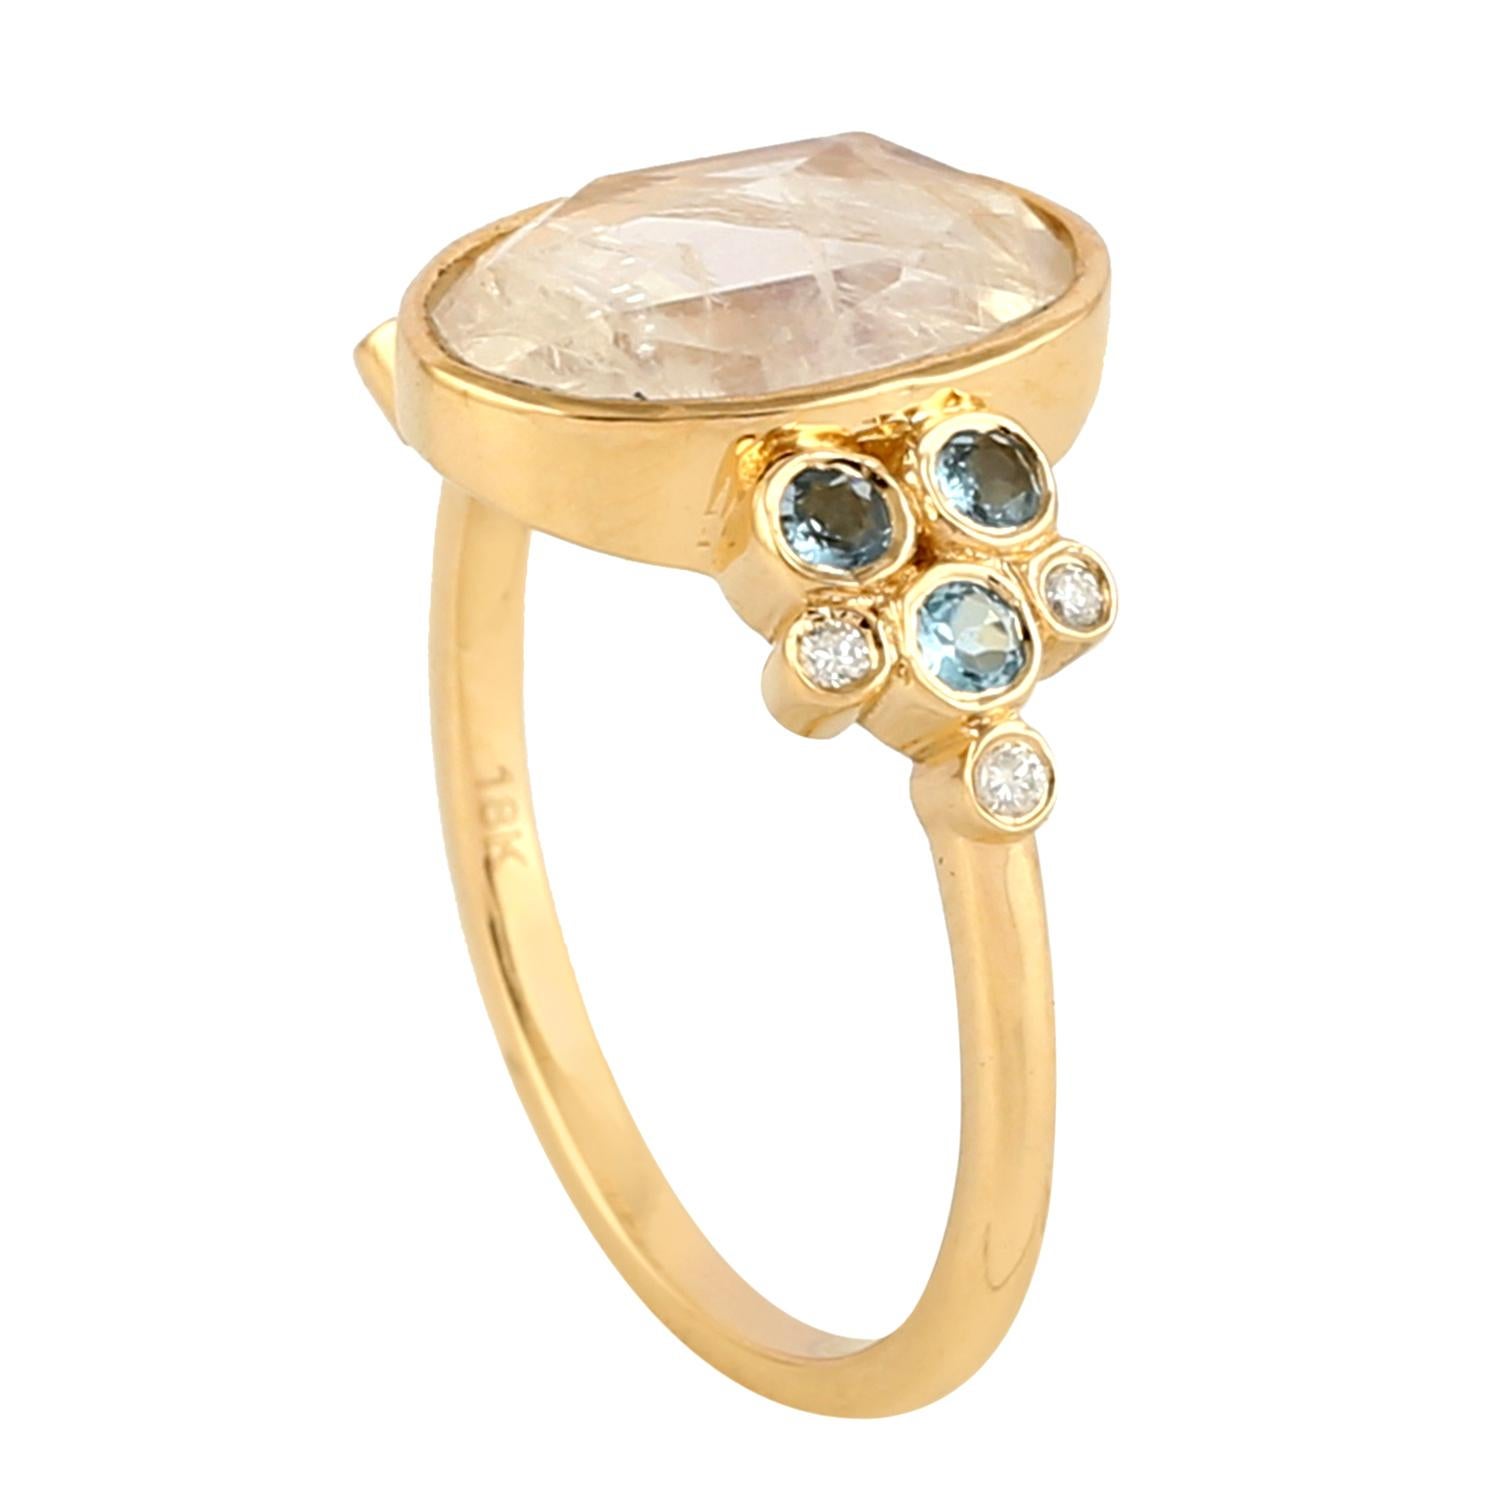 This ring has been meticulously crafted from 14-karat yellow gold. It is set in 1.94 carats of moonstone, .21 carats aquamarine and .06 carats of sparkling diamonds. Also available in ruby.

The ring is a size 7 and may be resized to larger or